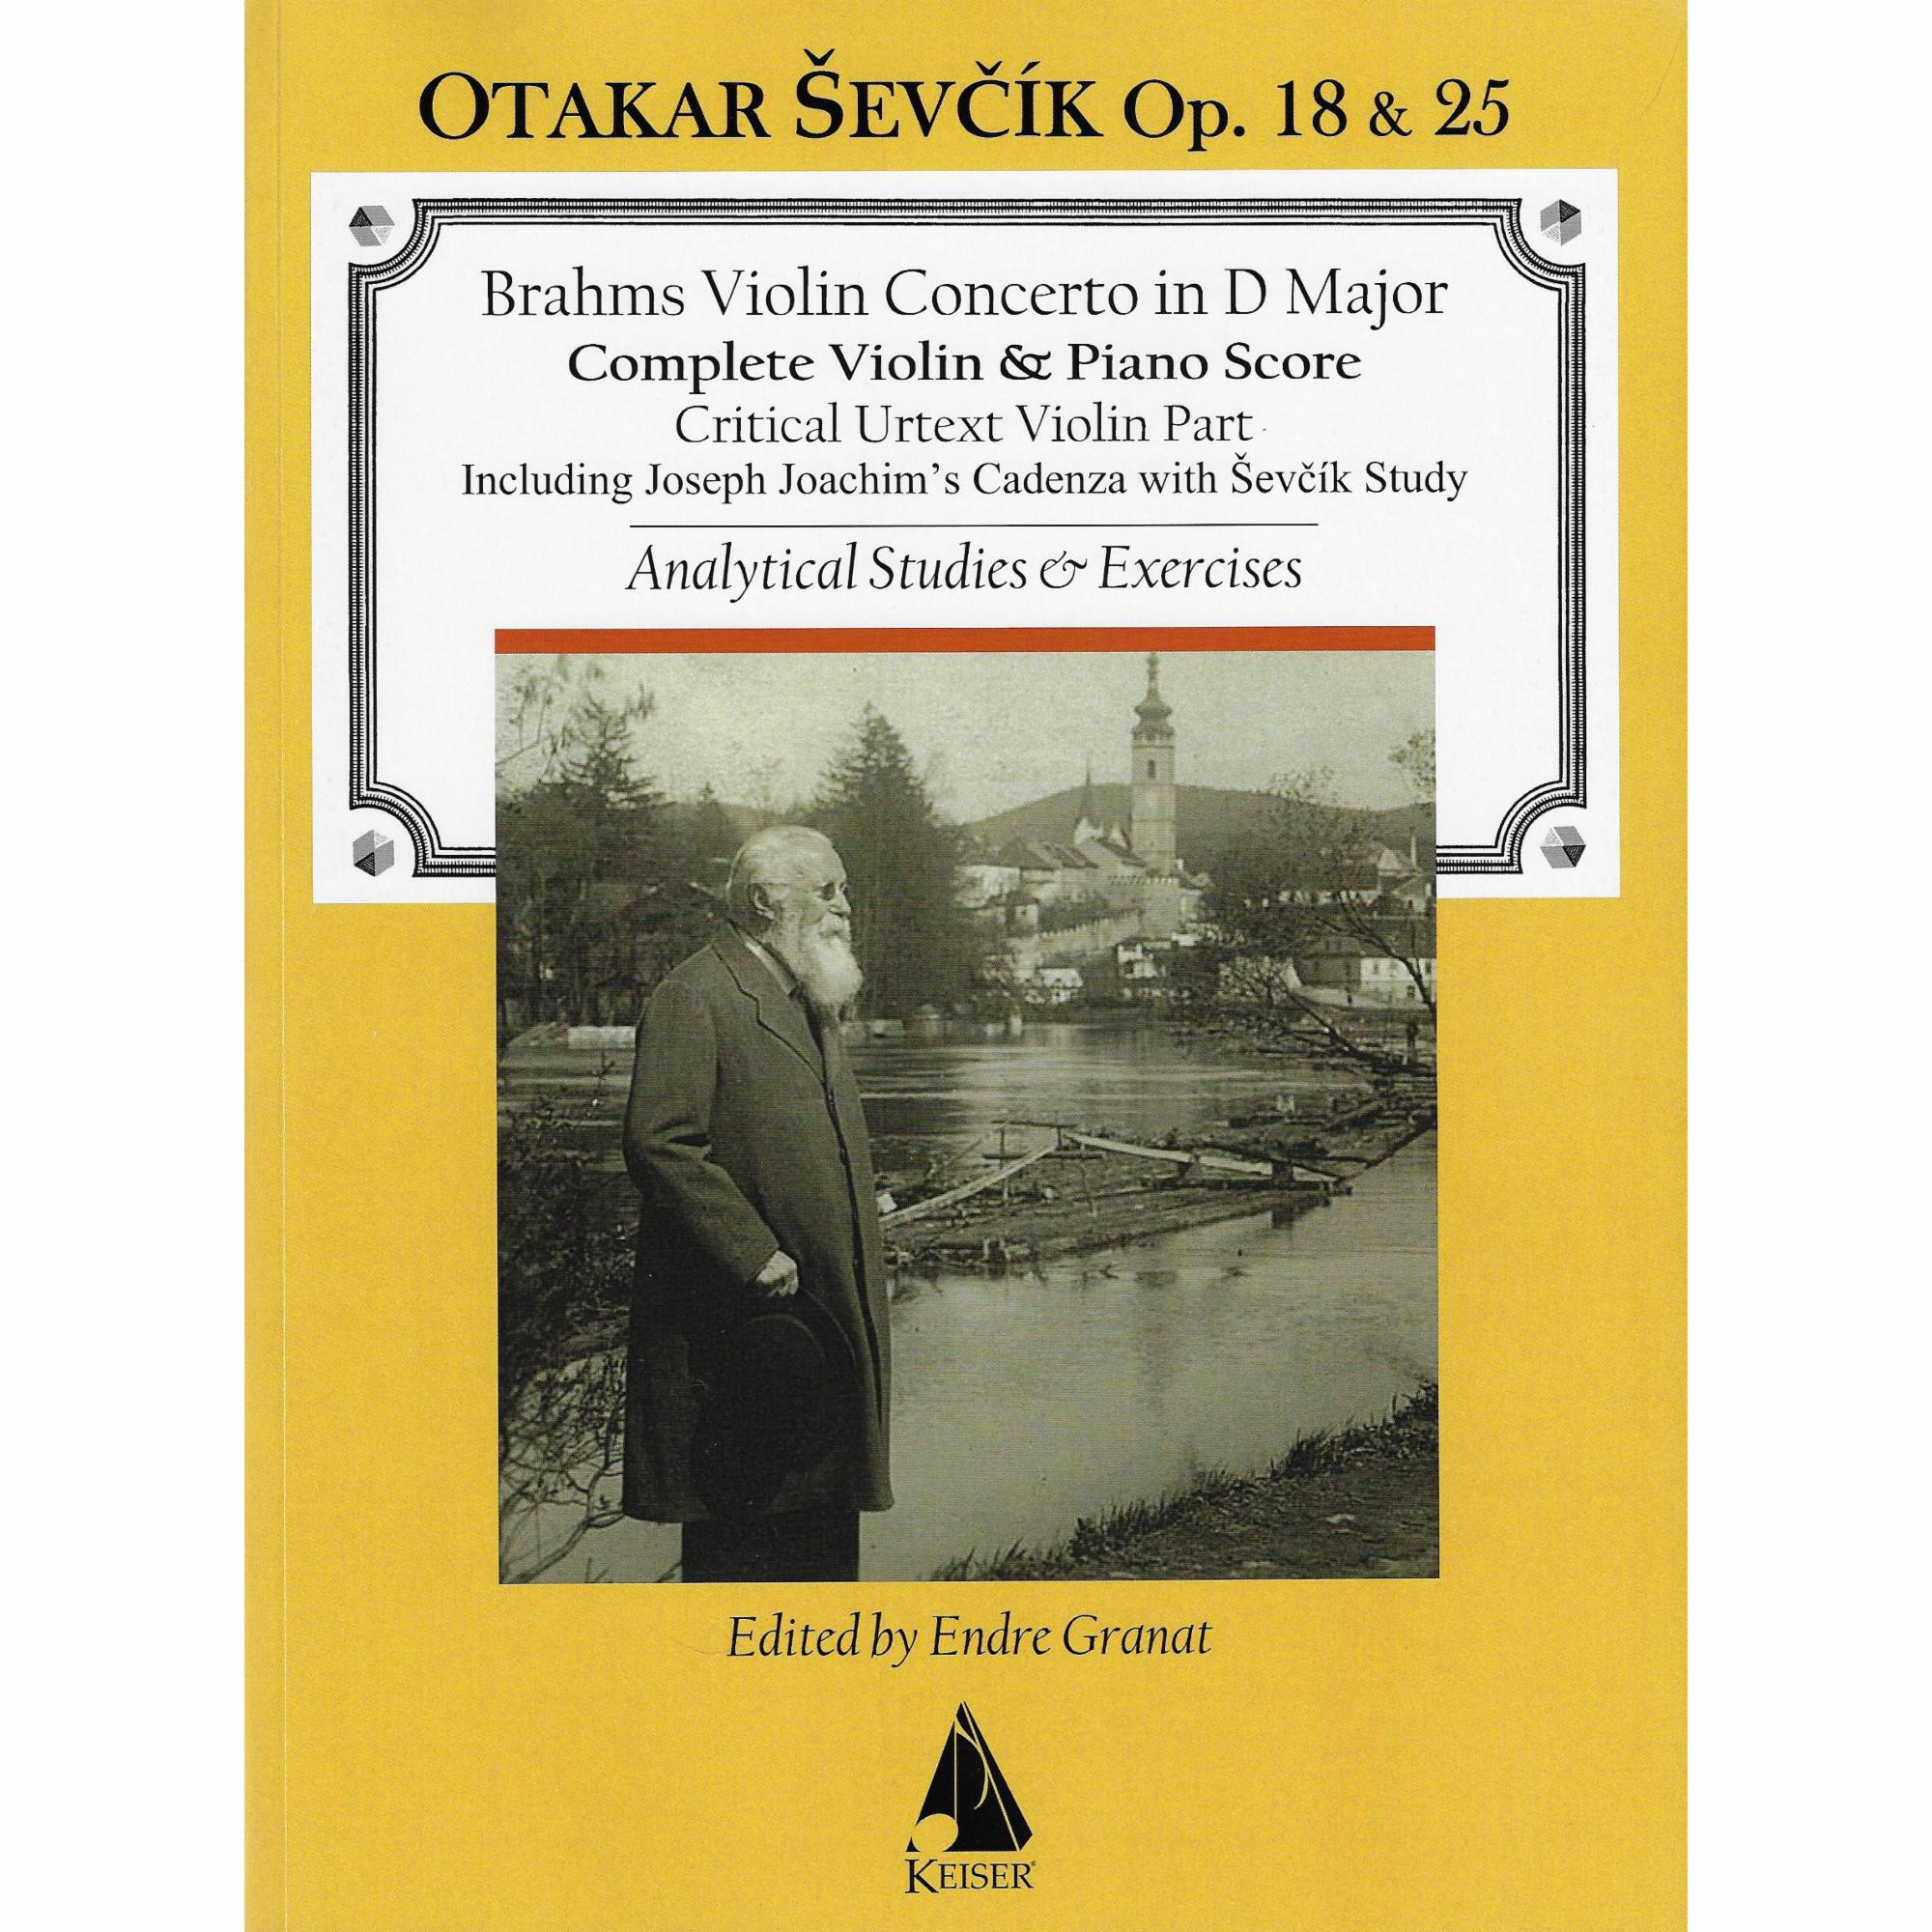 Sevcik -- Analytical Studies & Exercises, Op. 18 & 25 (after Brahms Concerto and Joachim's Cadenza)